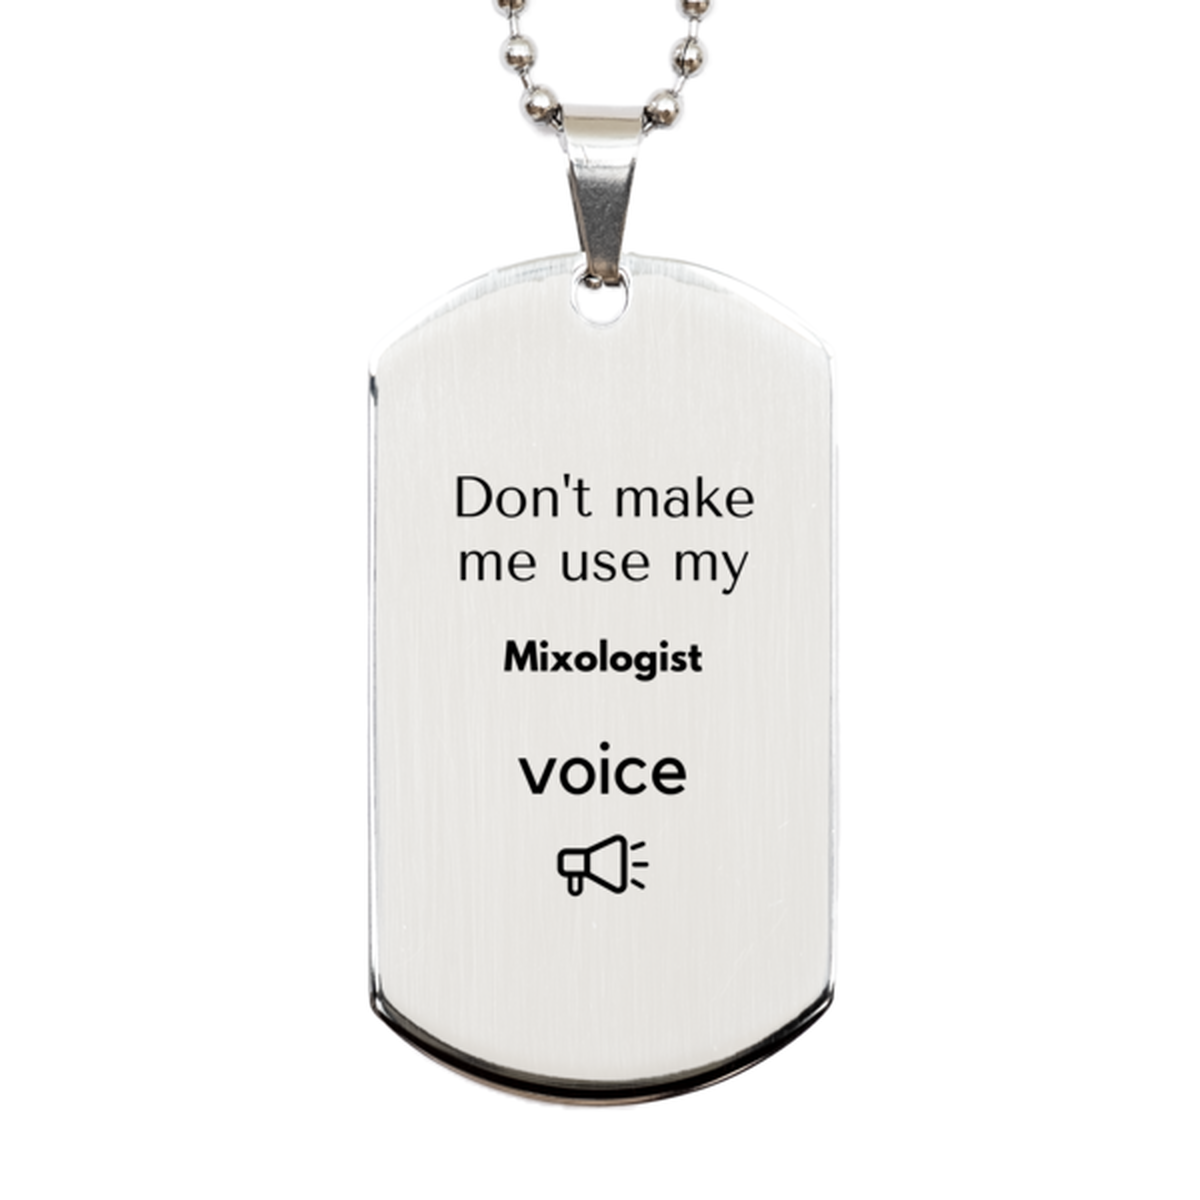 Don't make me use my Mixologist voice, Sarcasm Mixologist Gifts, Christmas Mixologist Silver Dog Tag Birthday Unique Gifts For Mixologist Coworkers, Men, Women, Colleague, Friends